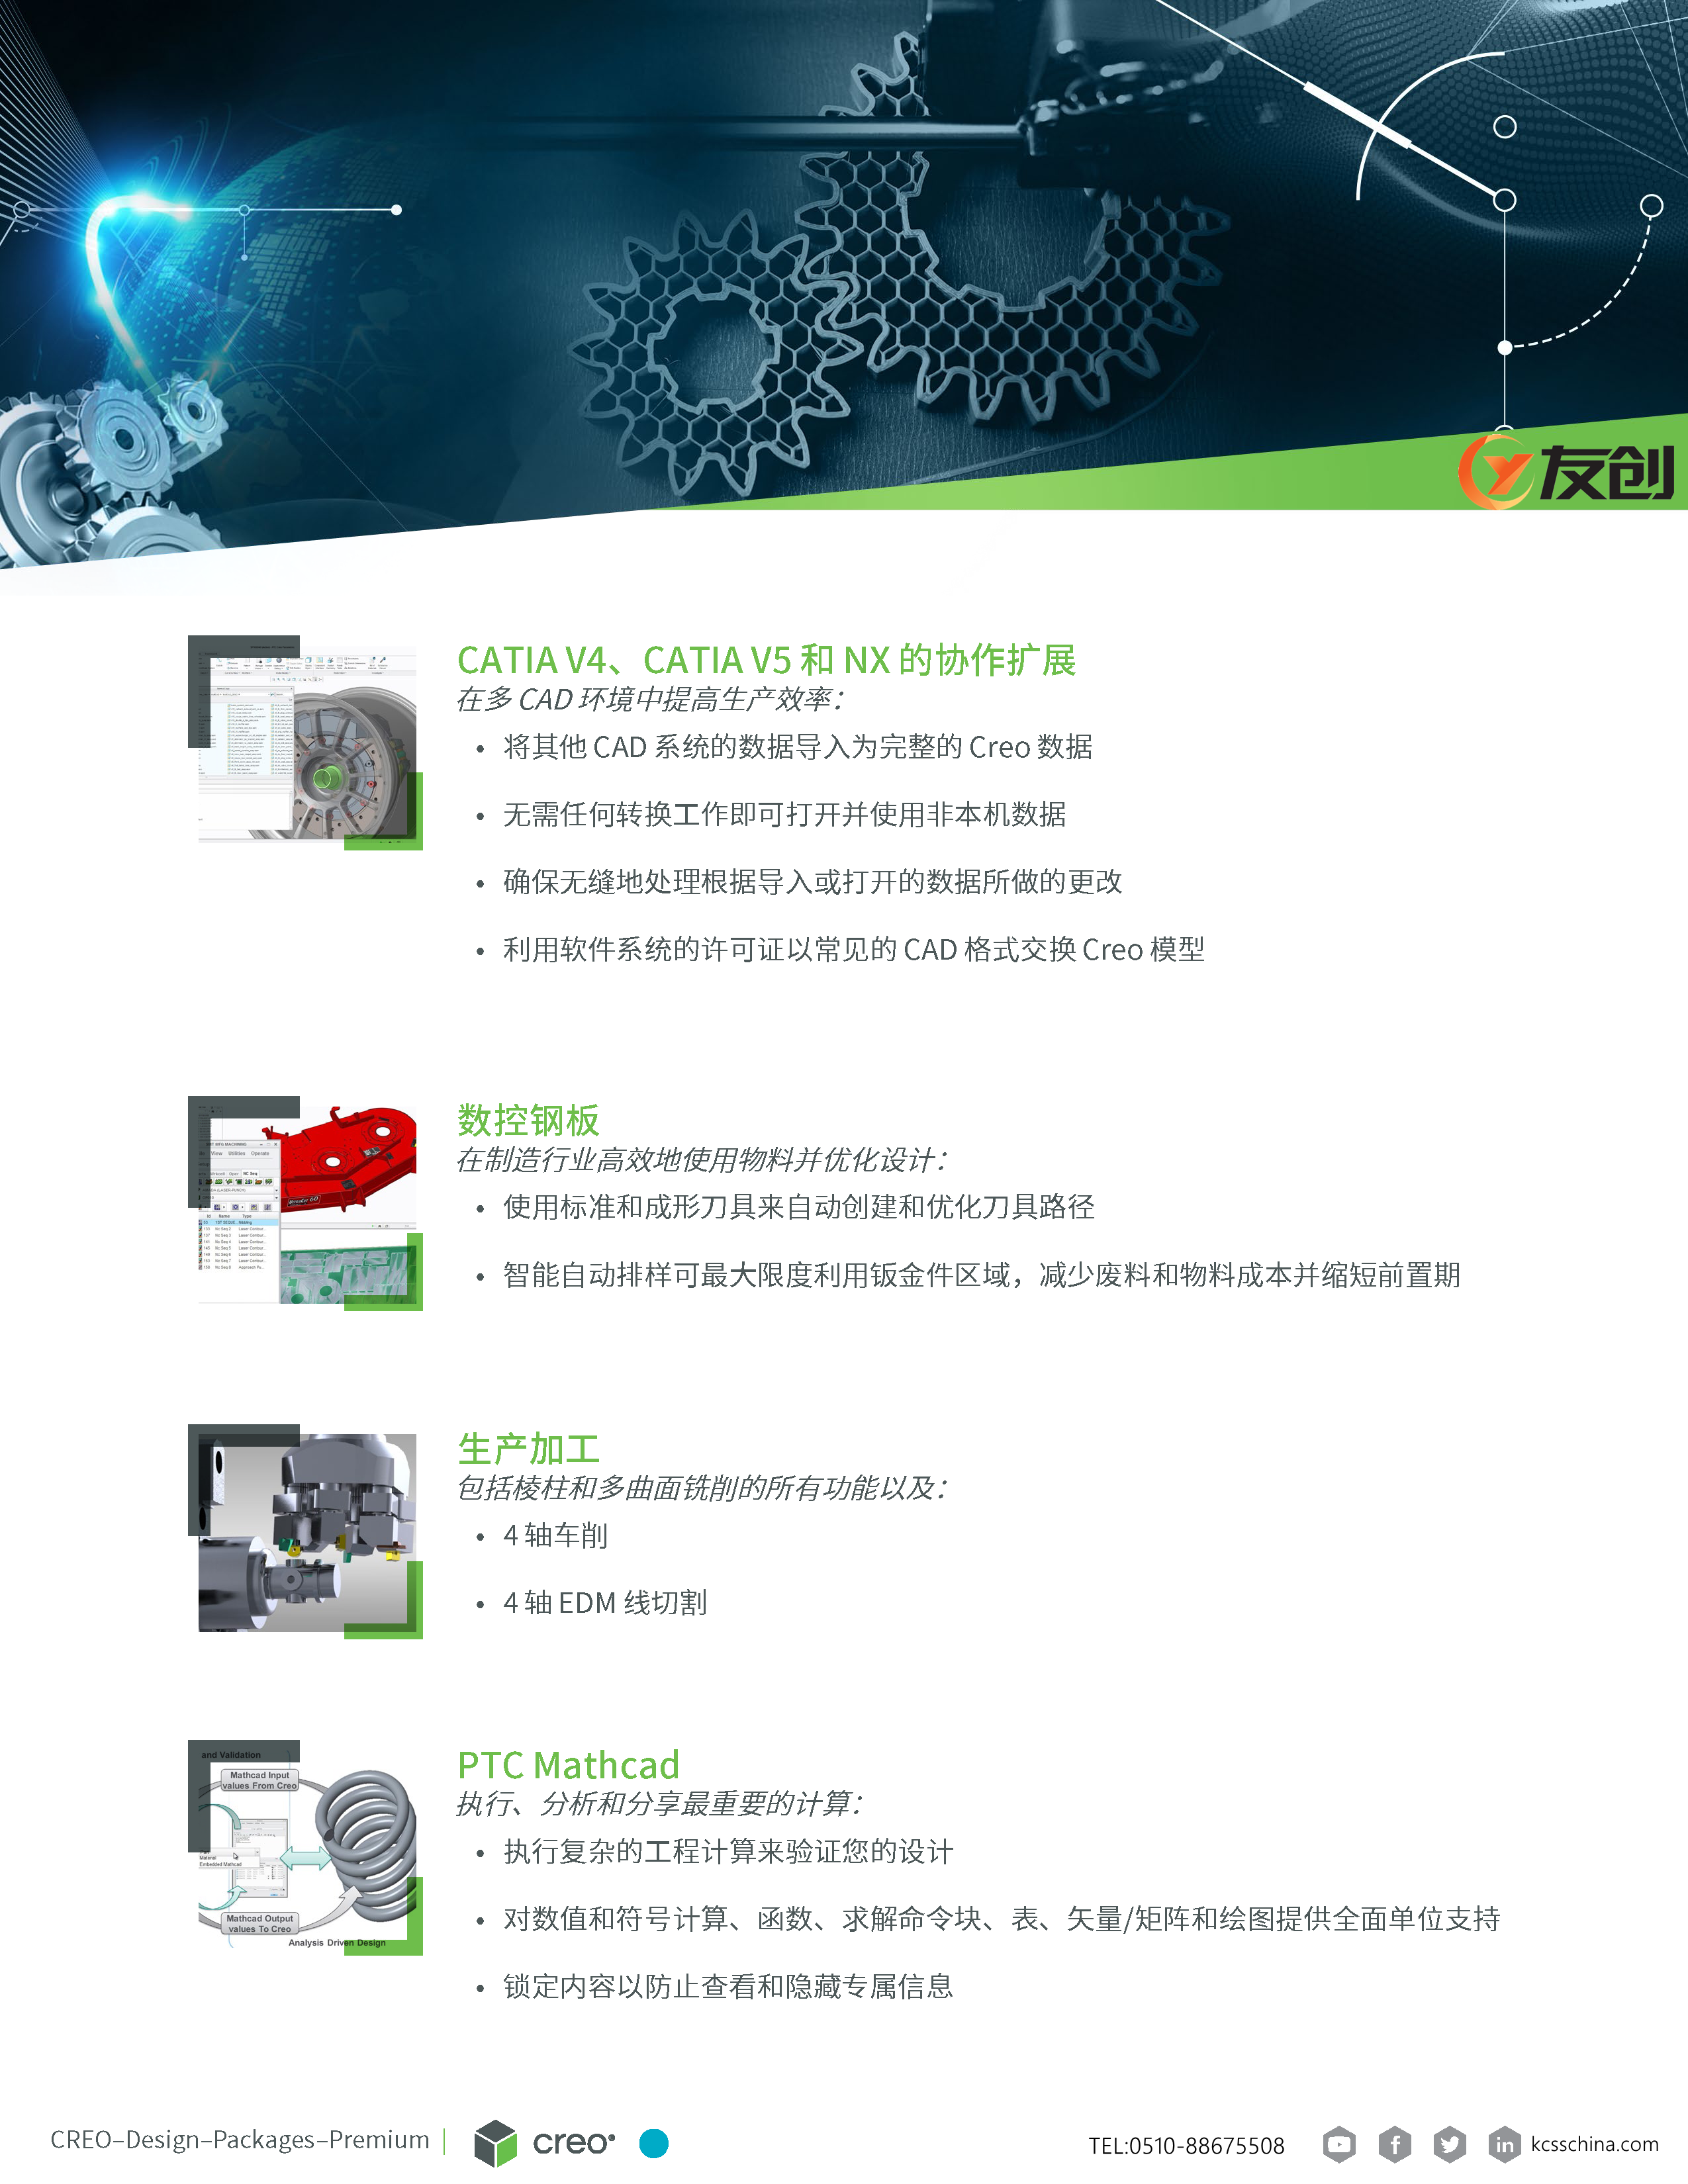 Creo Design Premium Brochure (Simplified Chinese)_页面_4_副本.png